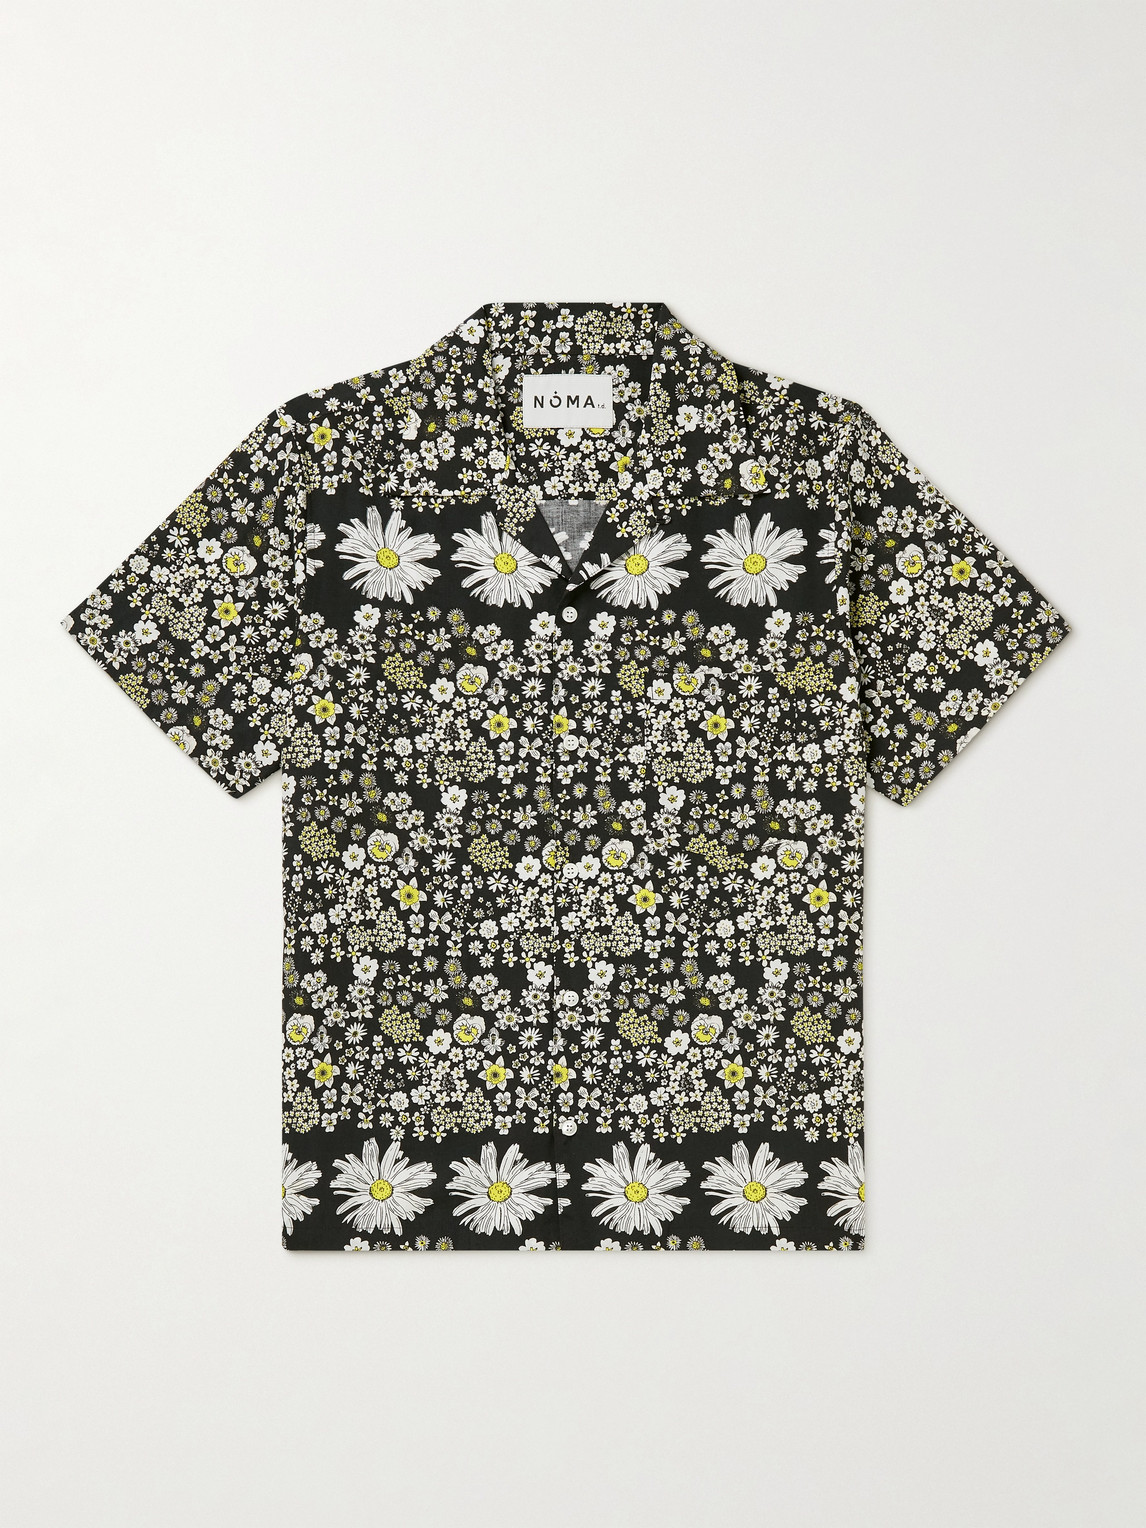 NOMA T.D. CONVERTIBLE-COLLAR PRINTED REXCELL SHIRT